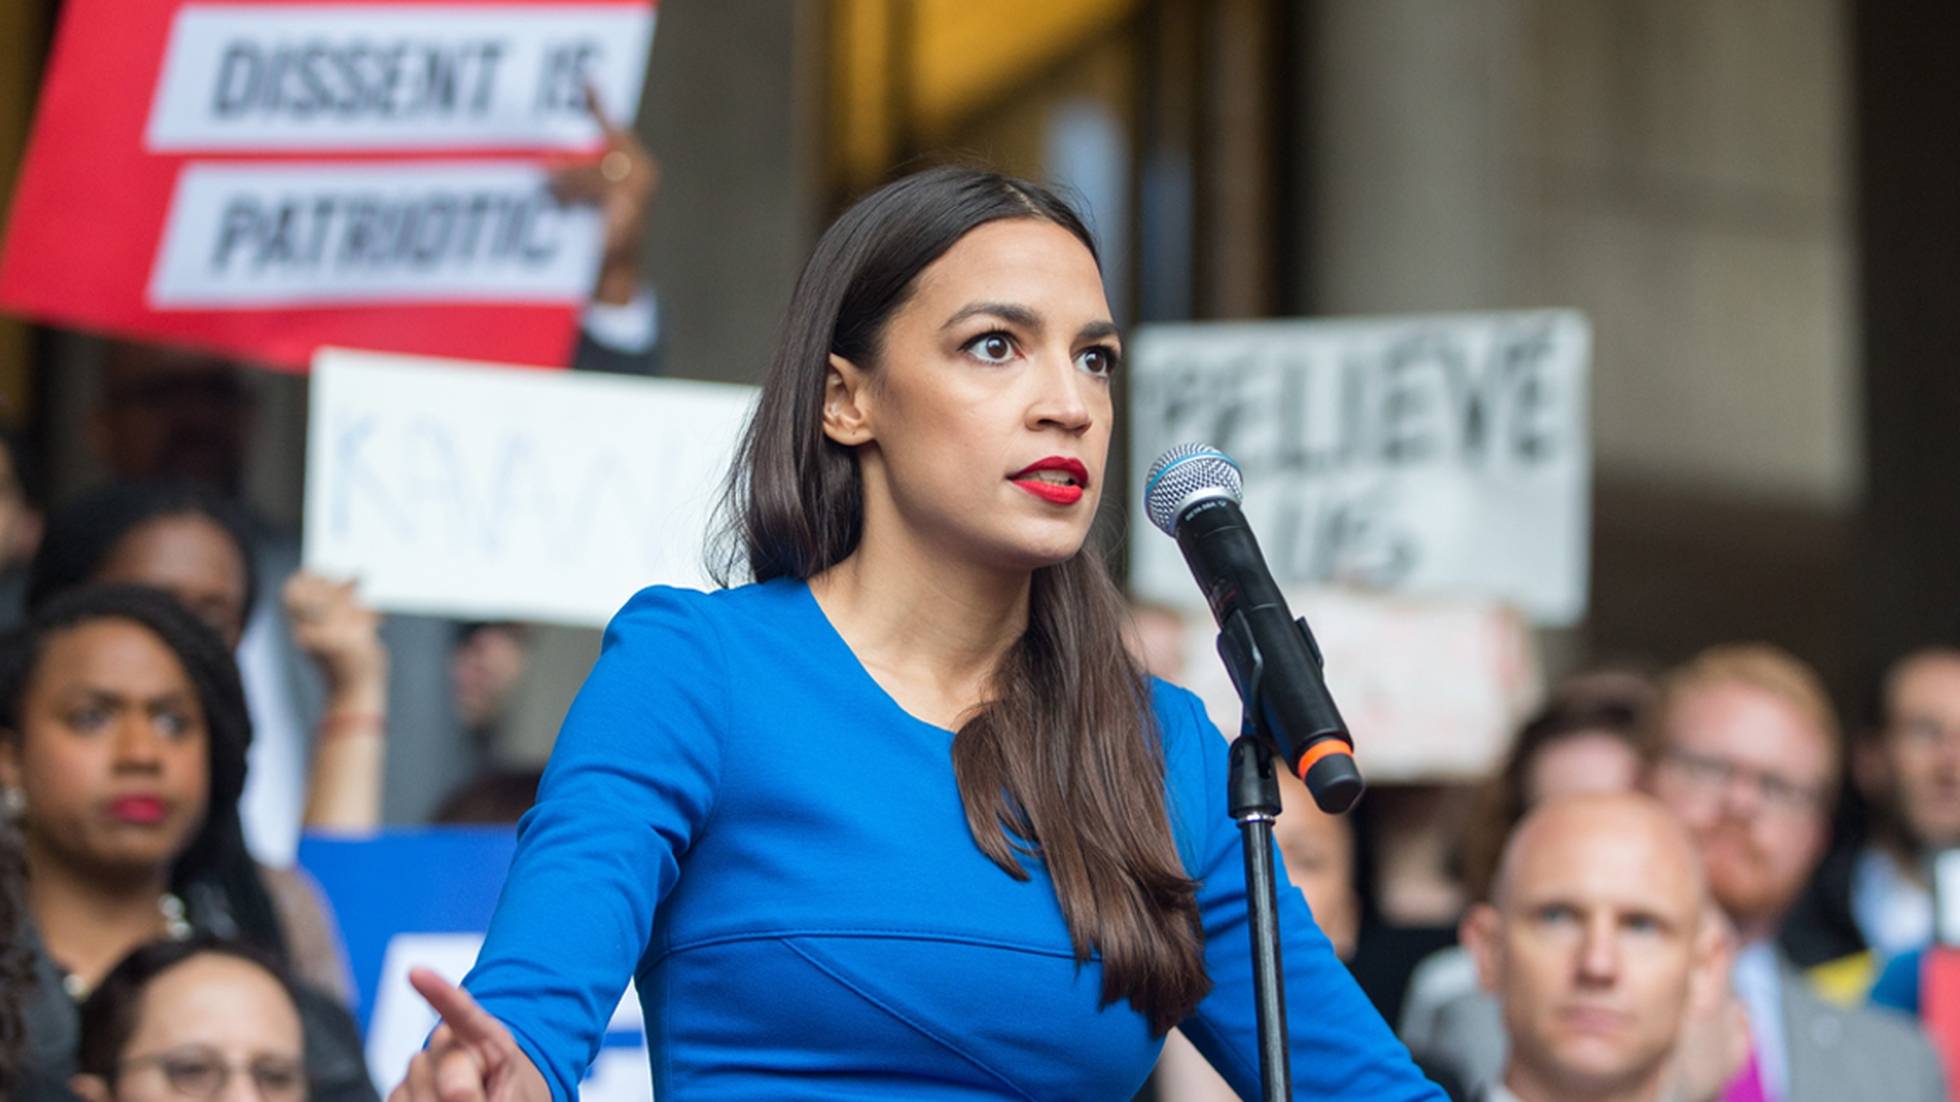 Alexandria Ocasio-Cortez. The new face of the Democratic party who comes  from the Bronx - LifeGate